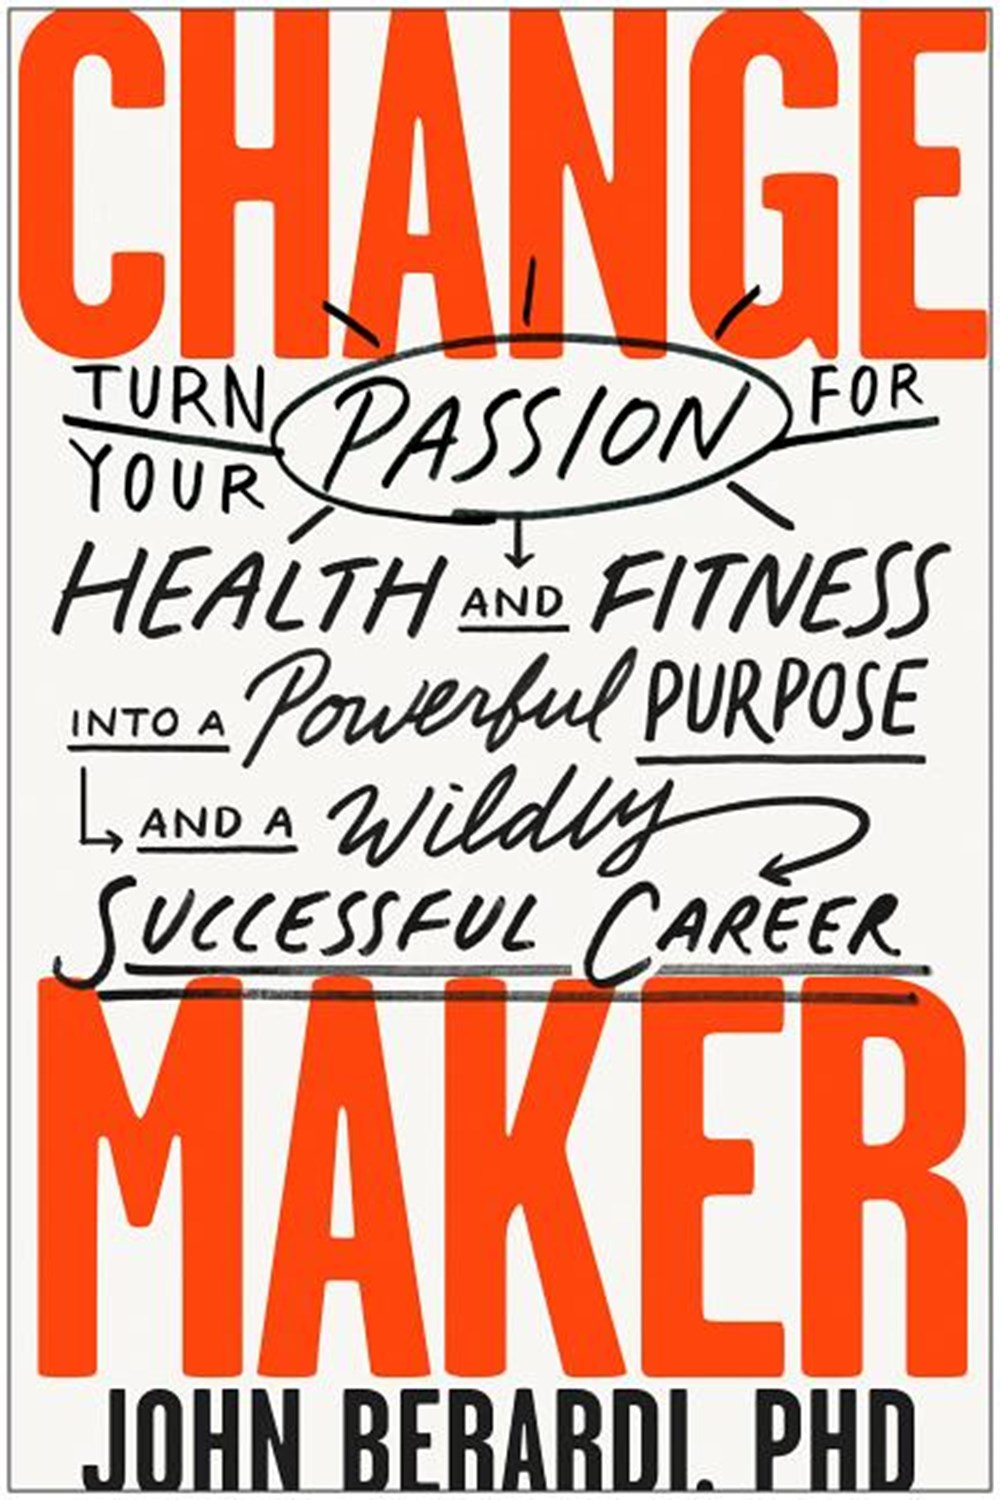 Change Maker Turn Your Passion for Health and Fitness Into a Powerful Purpose and a Wildly Successfu